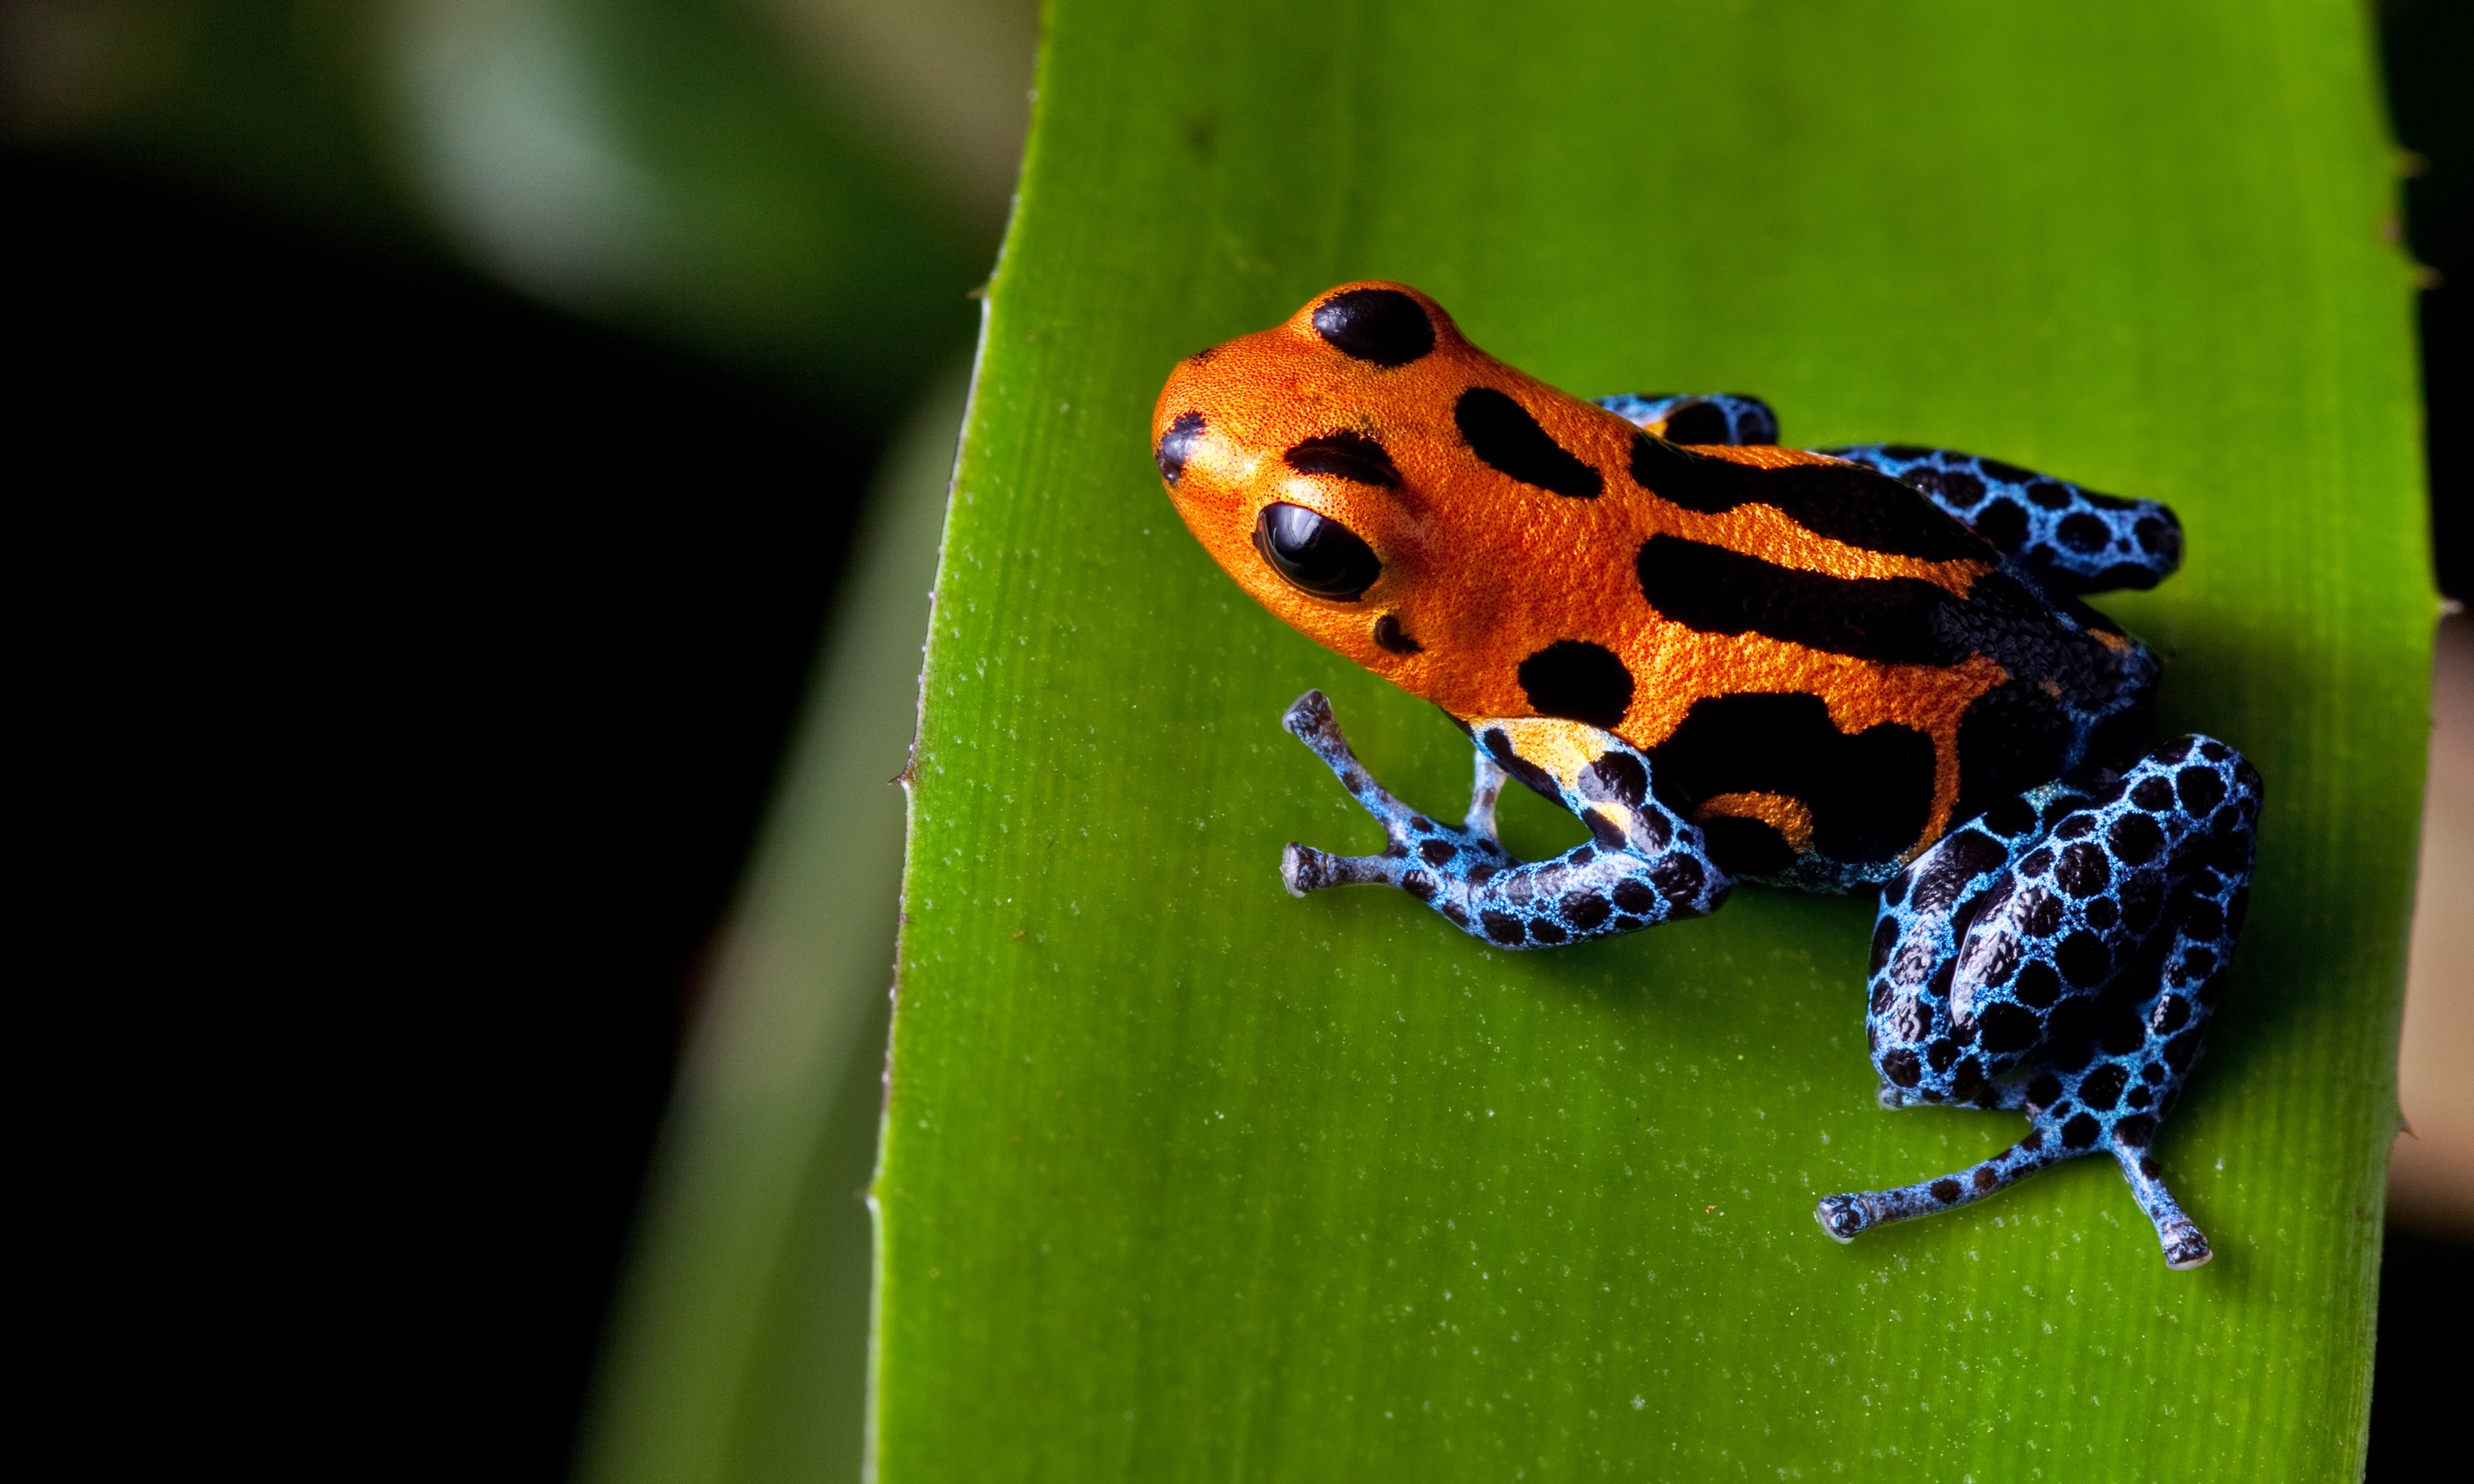 http://www.shutterstock.com/pic-88805893/stock-photo-red-striped-poison-dart-frog-blue-legs-of-amazon-rain-forest-in-peru-poisonous-animal-of-tropical.html